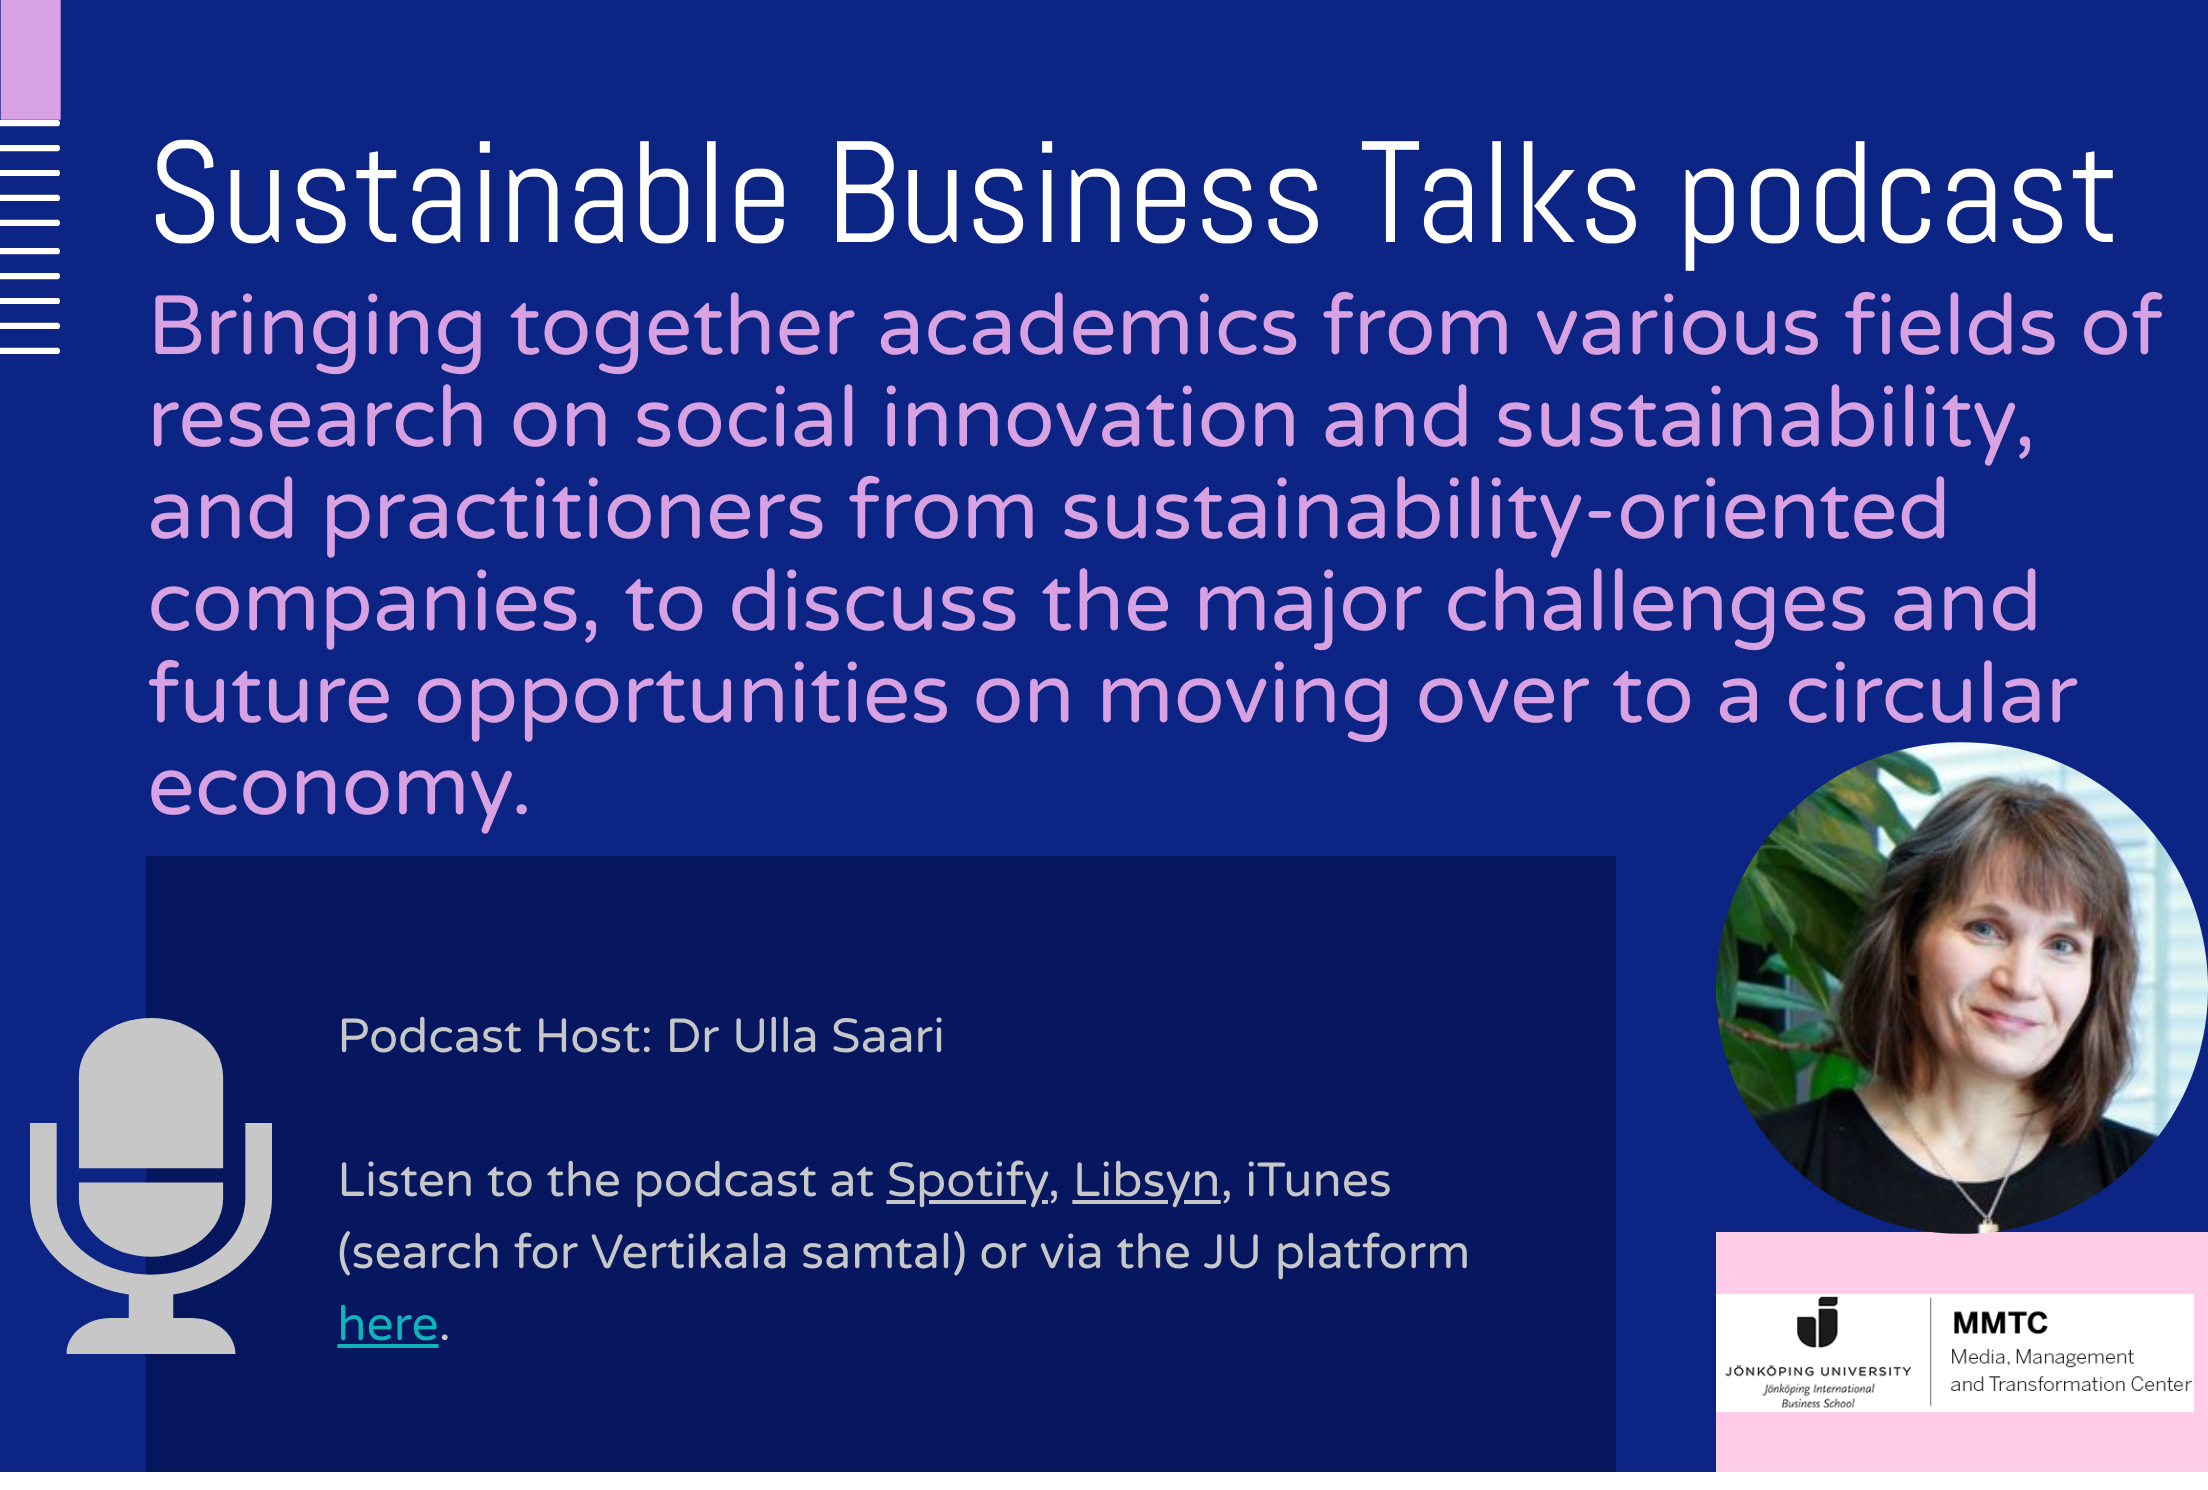 Sustainable Business Talks podcast hosted by MMTC bringing together researchers and practitioners to discuss sustainability issues